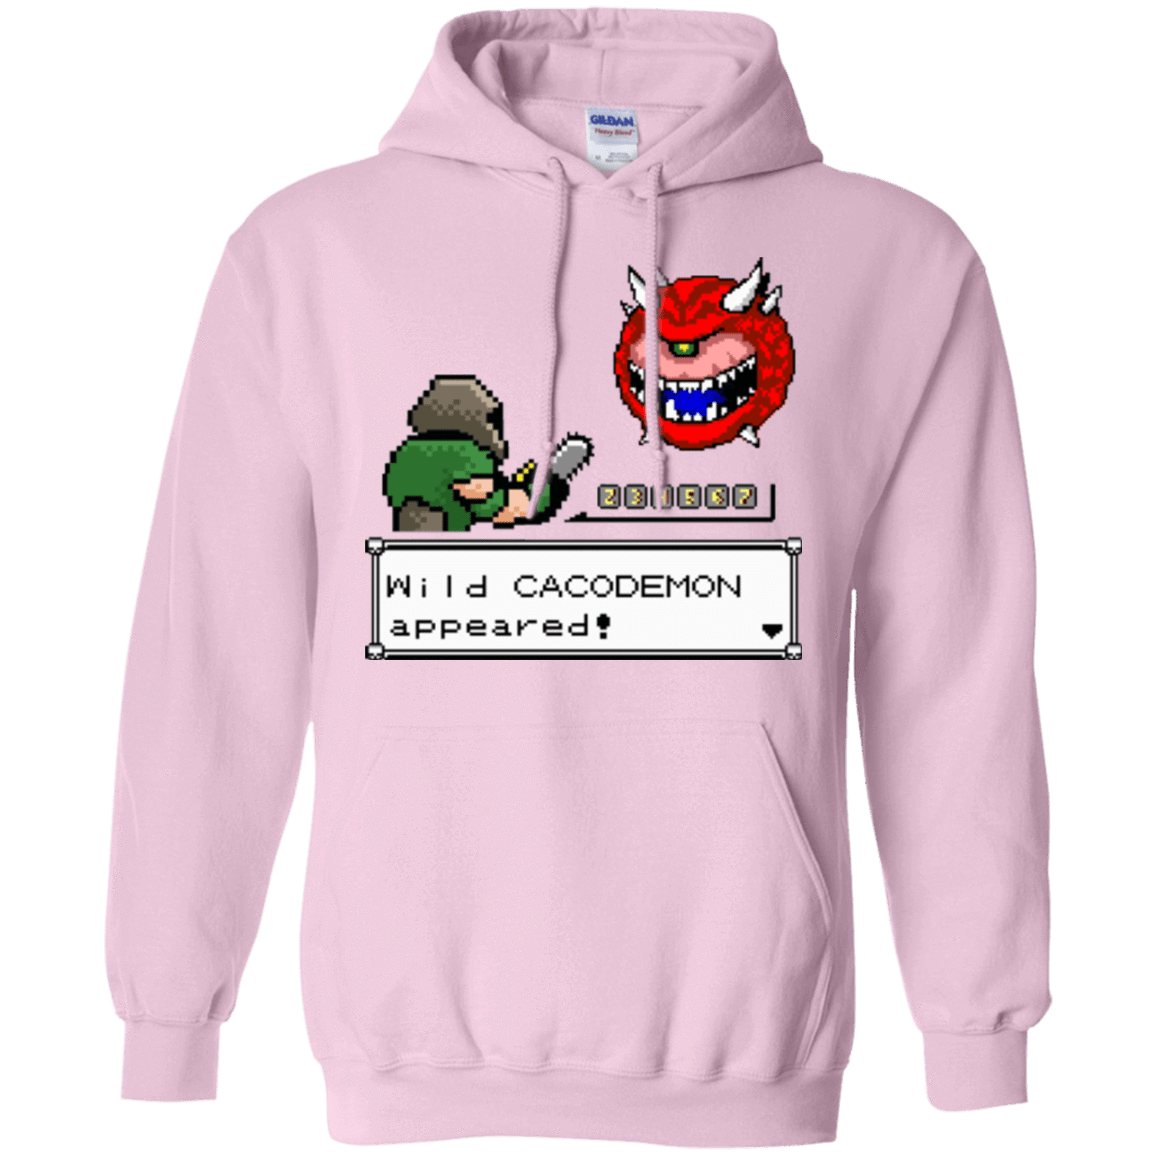 Sweatshirts Light Pink / Small A Wild Cacodemon Pullover Hoodie